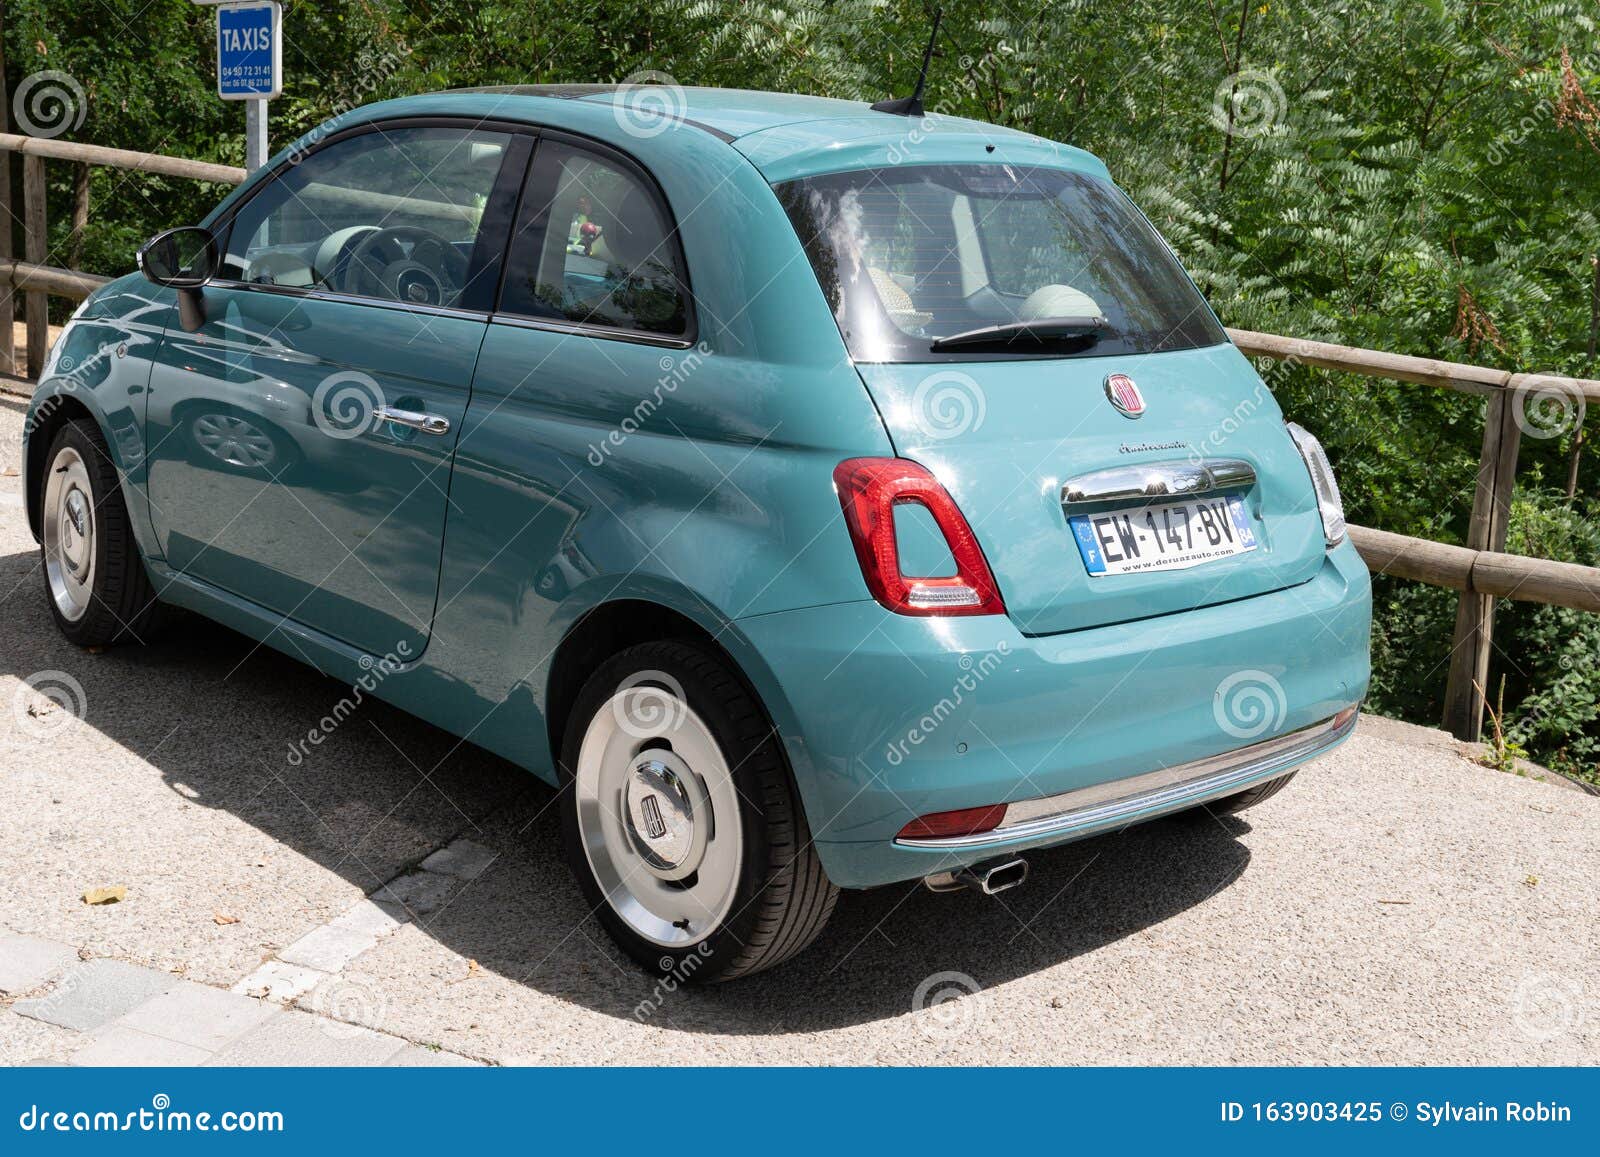 Bordeaux , Aquitaine France - 11 13 : Fiat 500 Blue Green Vintage Behind Color Rear in the Street Editorial Image - Image of retro, auto: 163903425